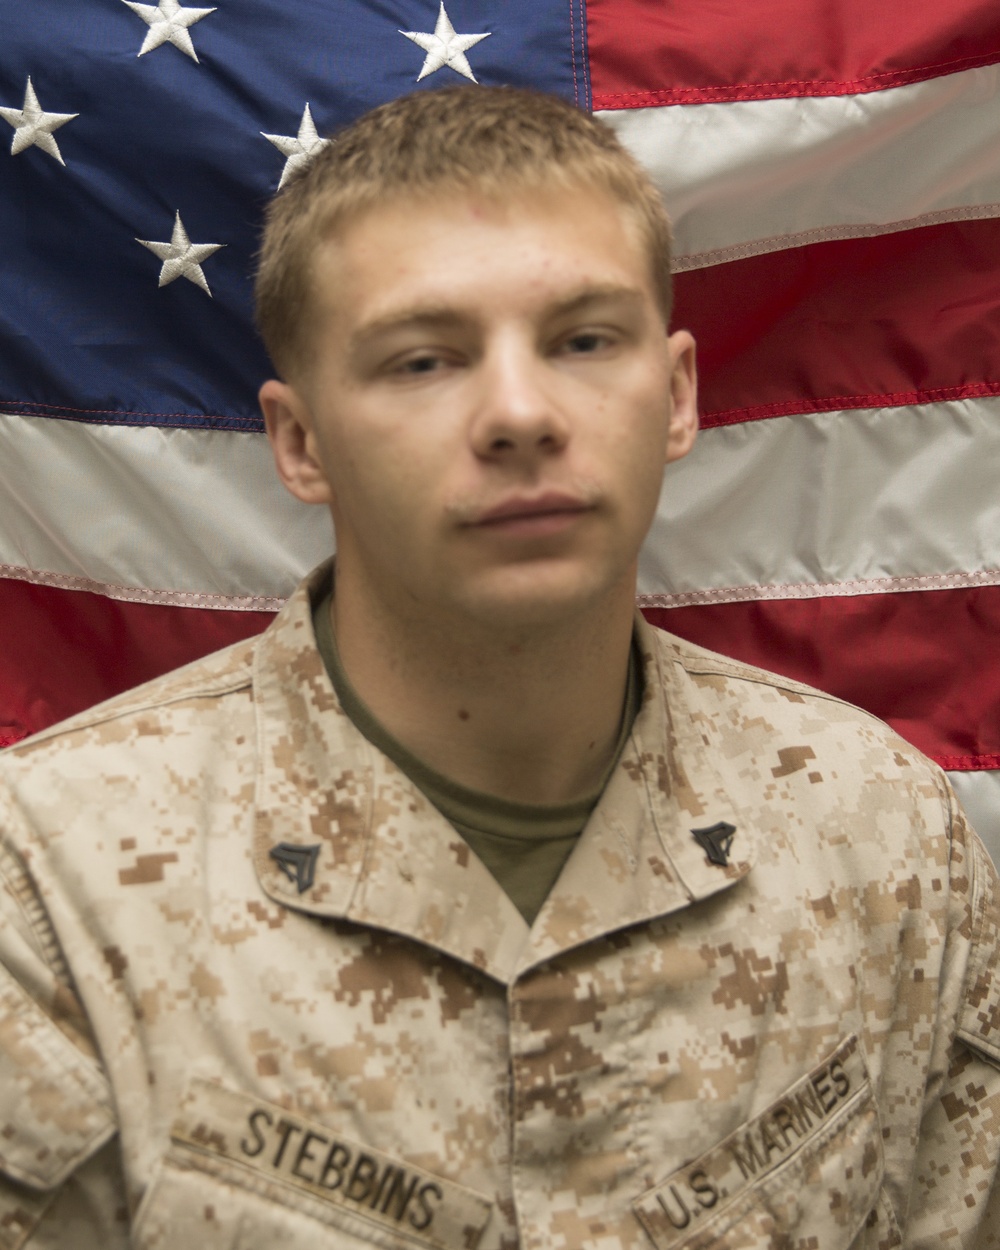 New York native serving with 24th MEU